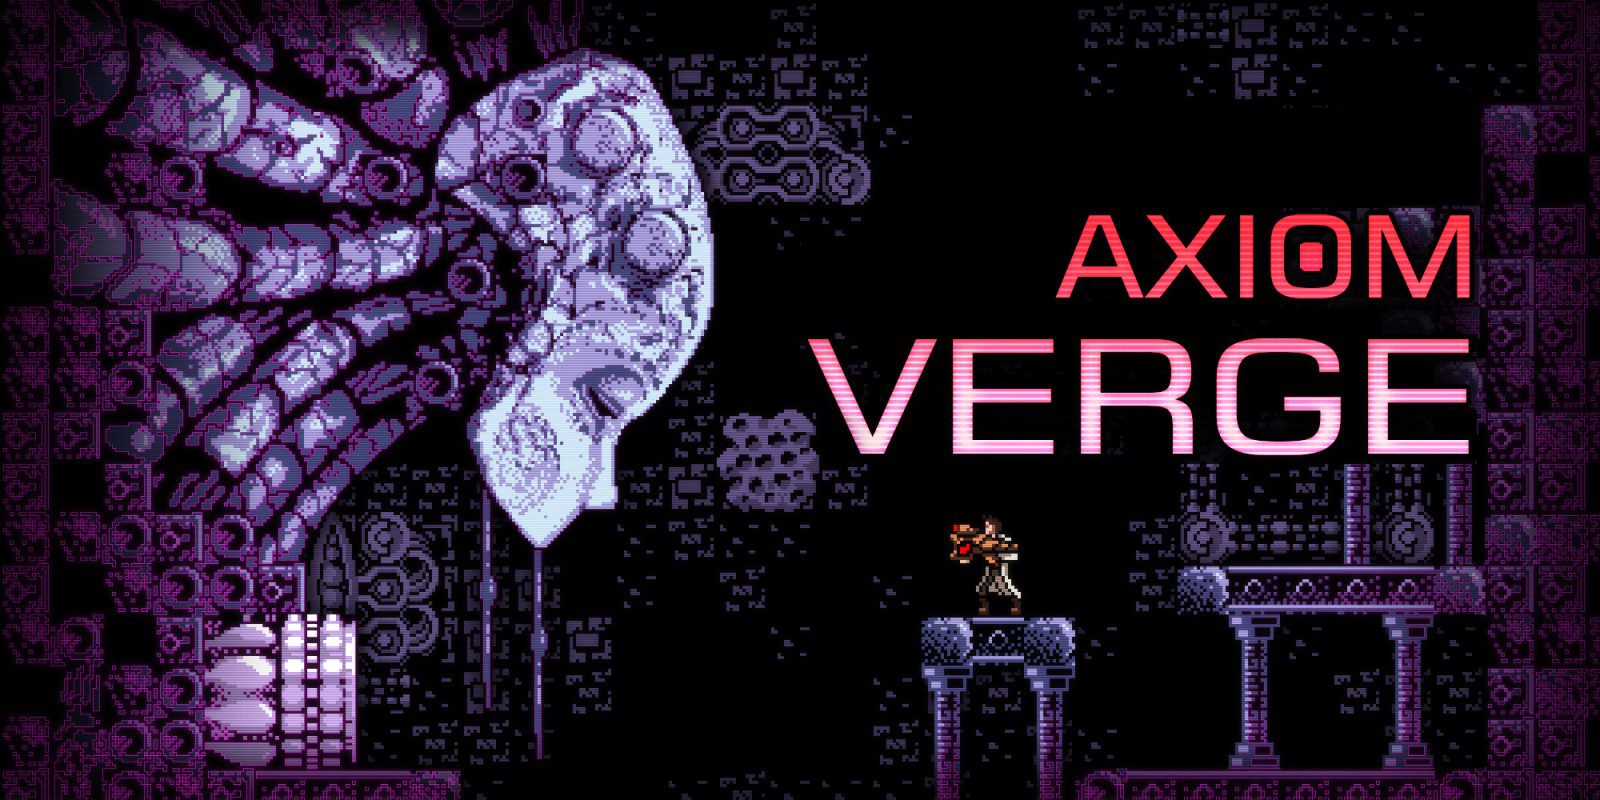 Axiom Verge crashed on Epic Store because it was missing Steam.xnb file